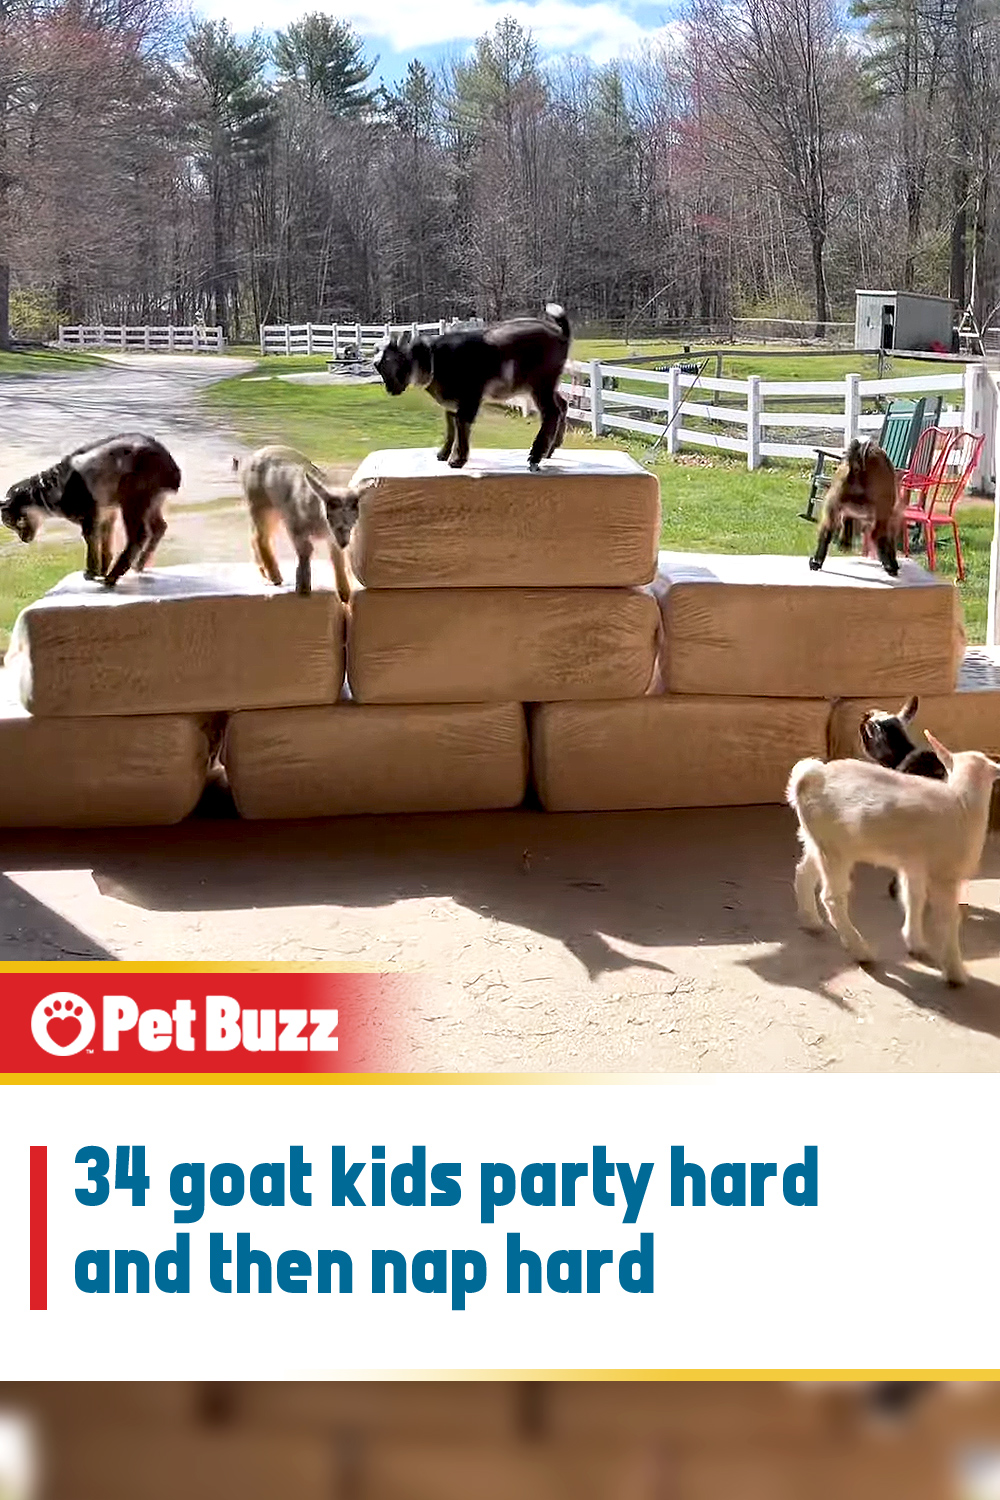 34 goat kids party hard and then nap hard